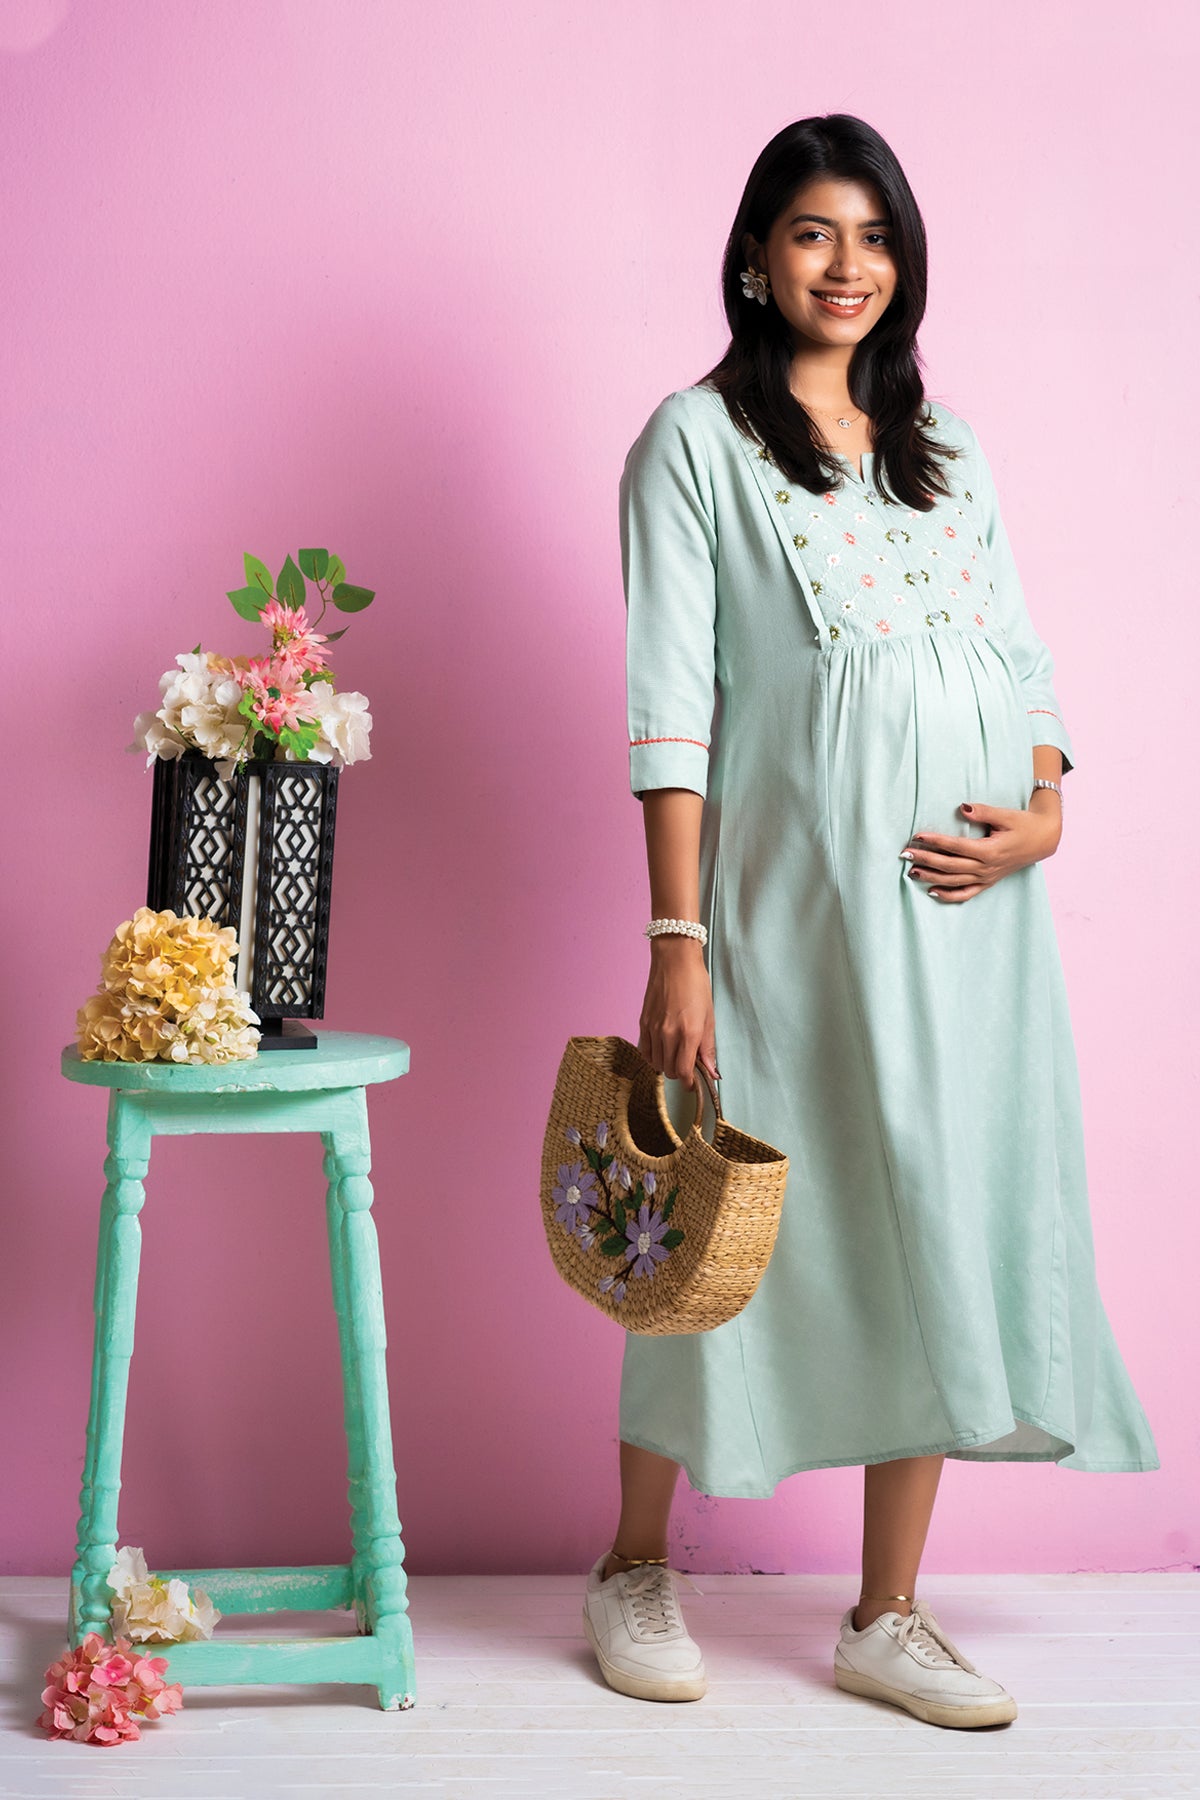 All Over Dobby Weave Maternity Kurta with Floral Embroidered Yoke - Green